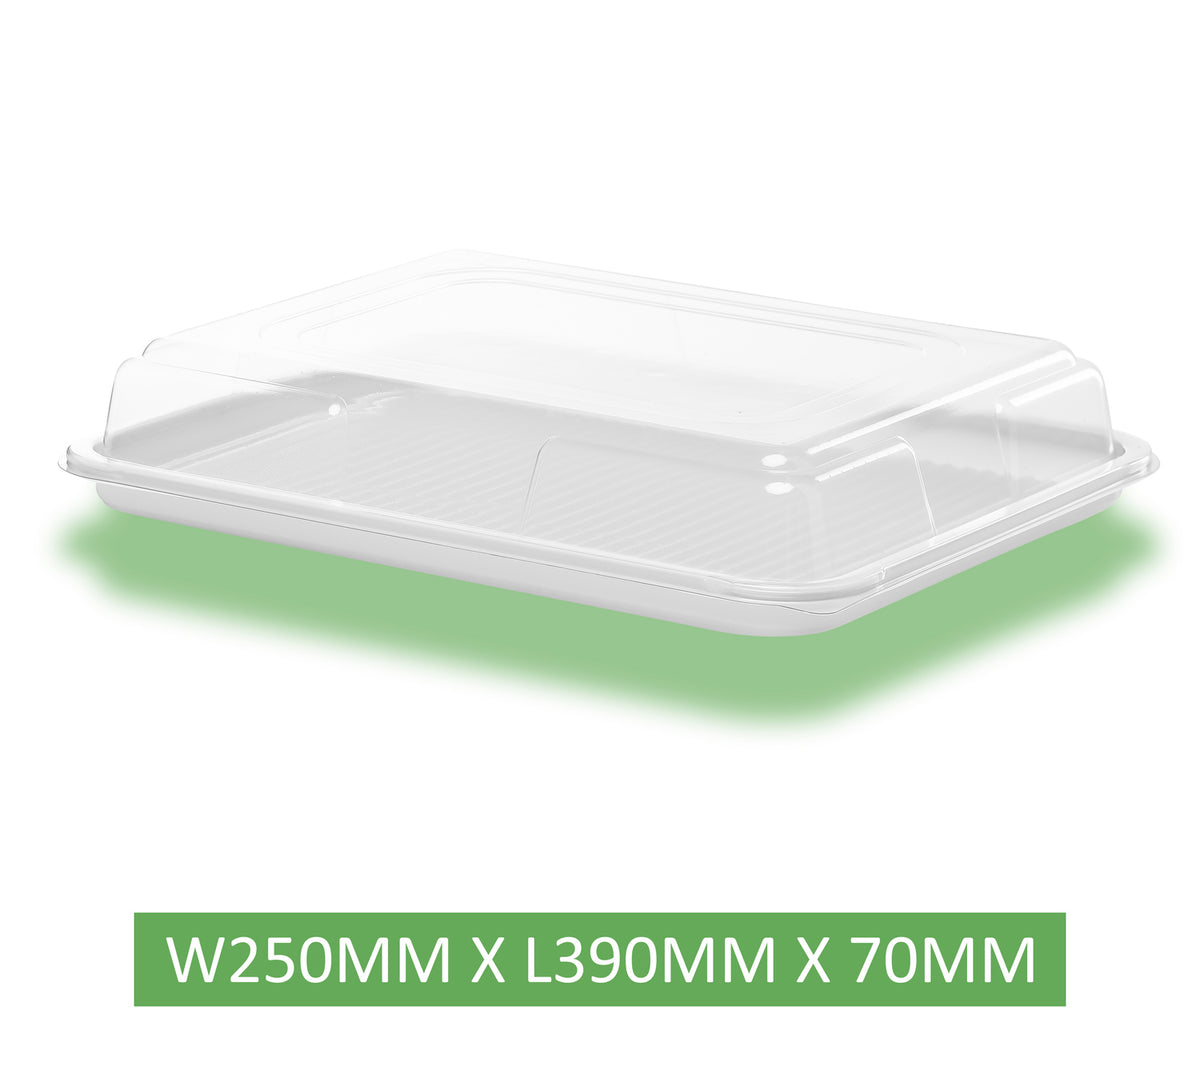 15 x Caterline Combi Clear Base Sandwich Platters with Lids (5 Large, 5 Medium, 5 Small)